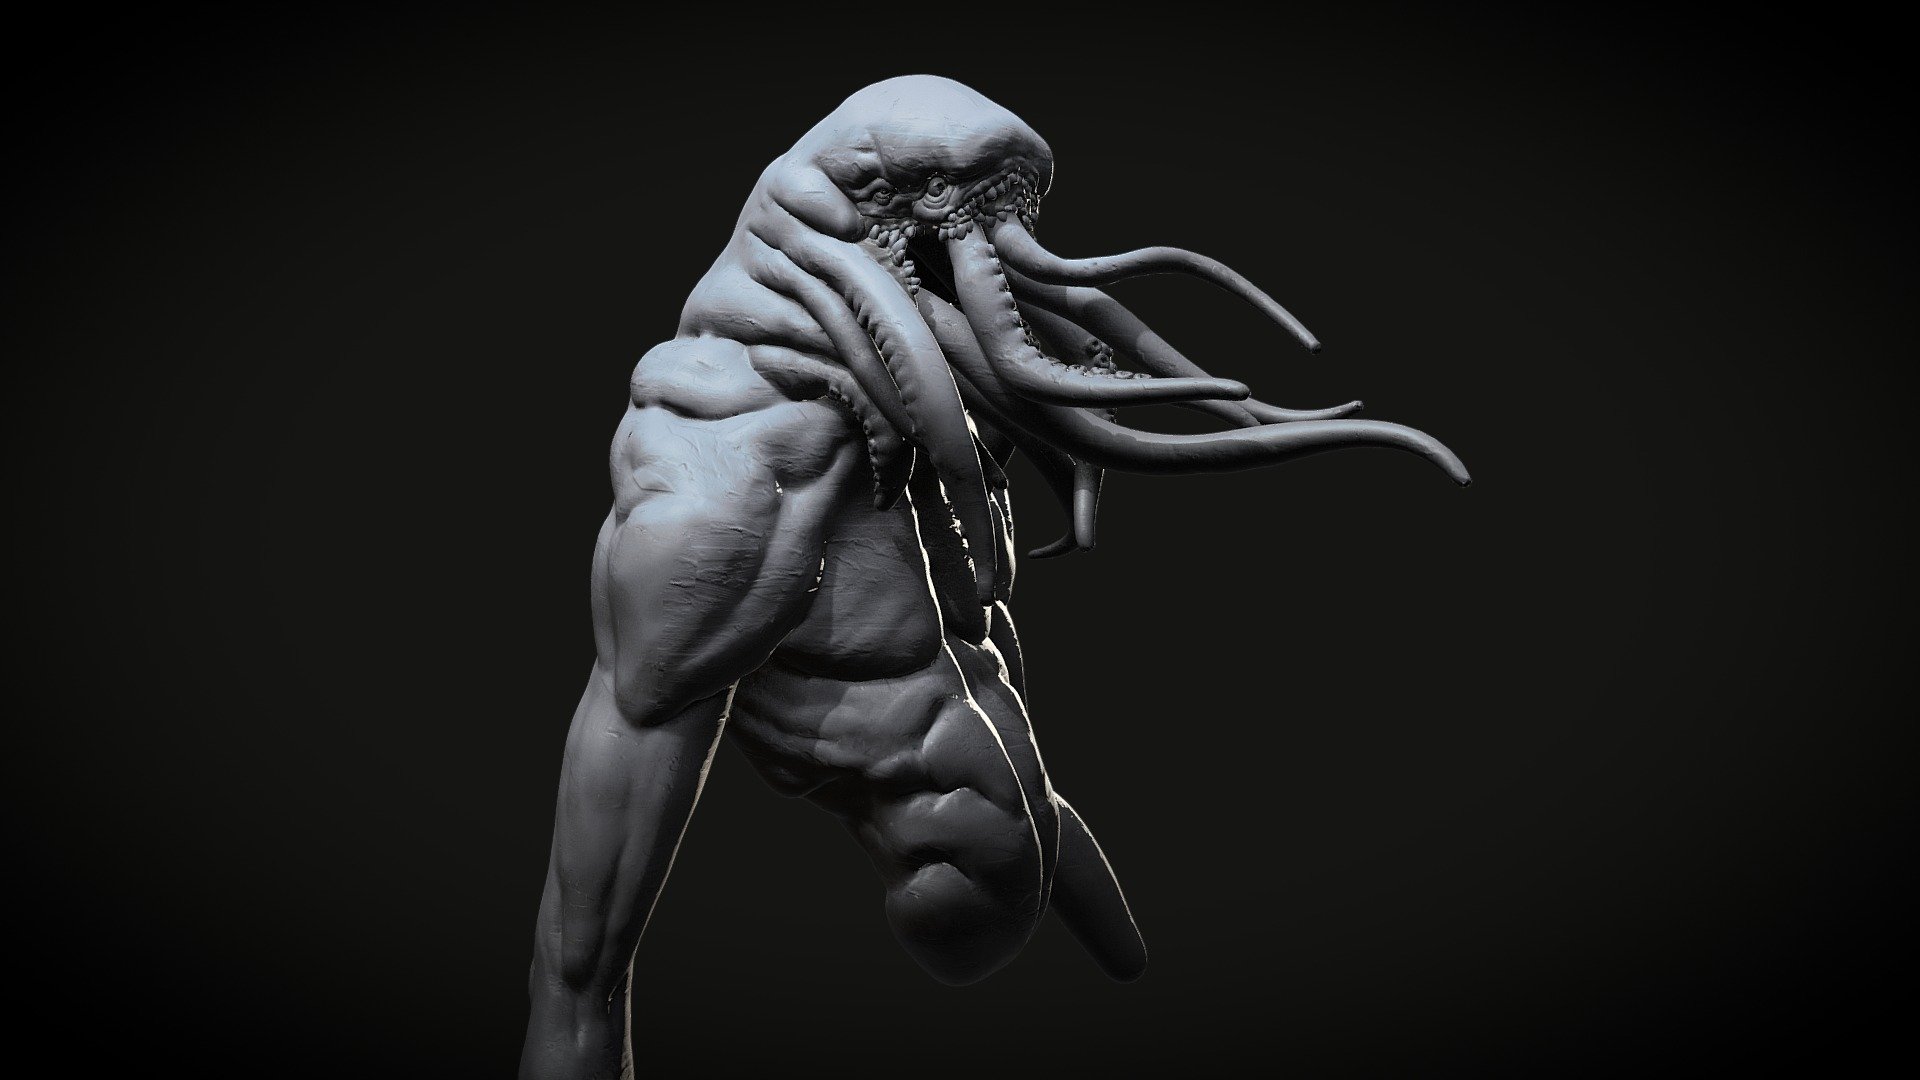 Day 19 of SculptJanuary 2018 with the Topic &ldquo;Lovecraftian